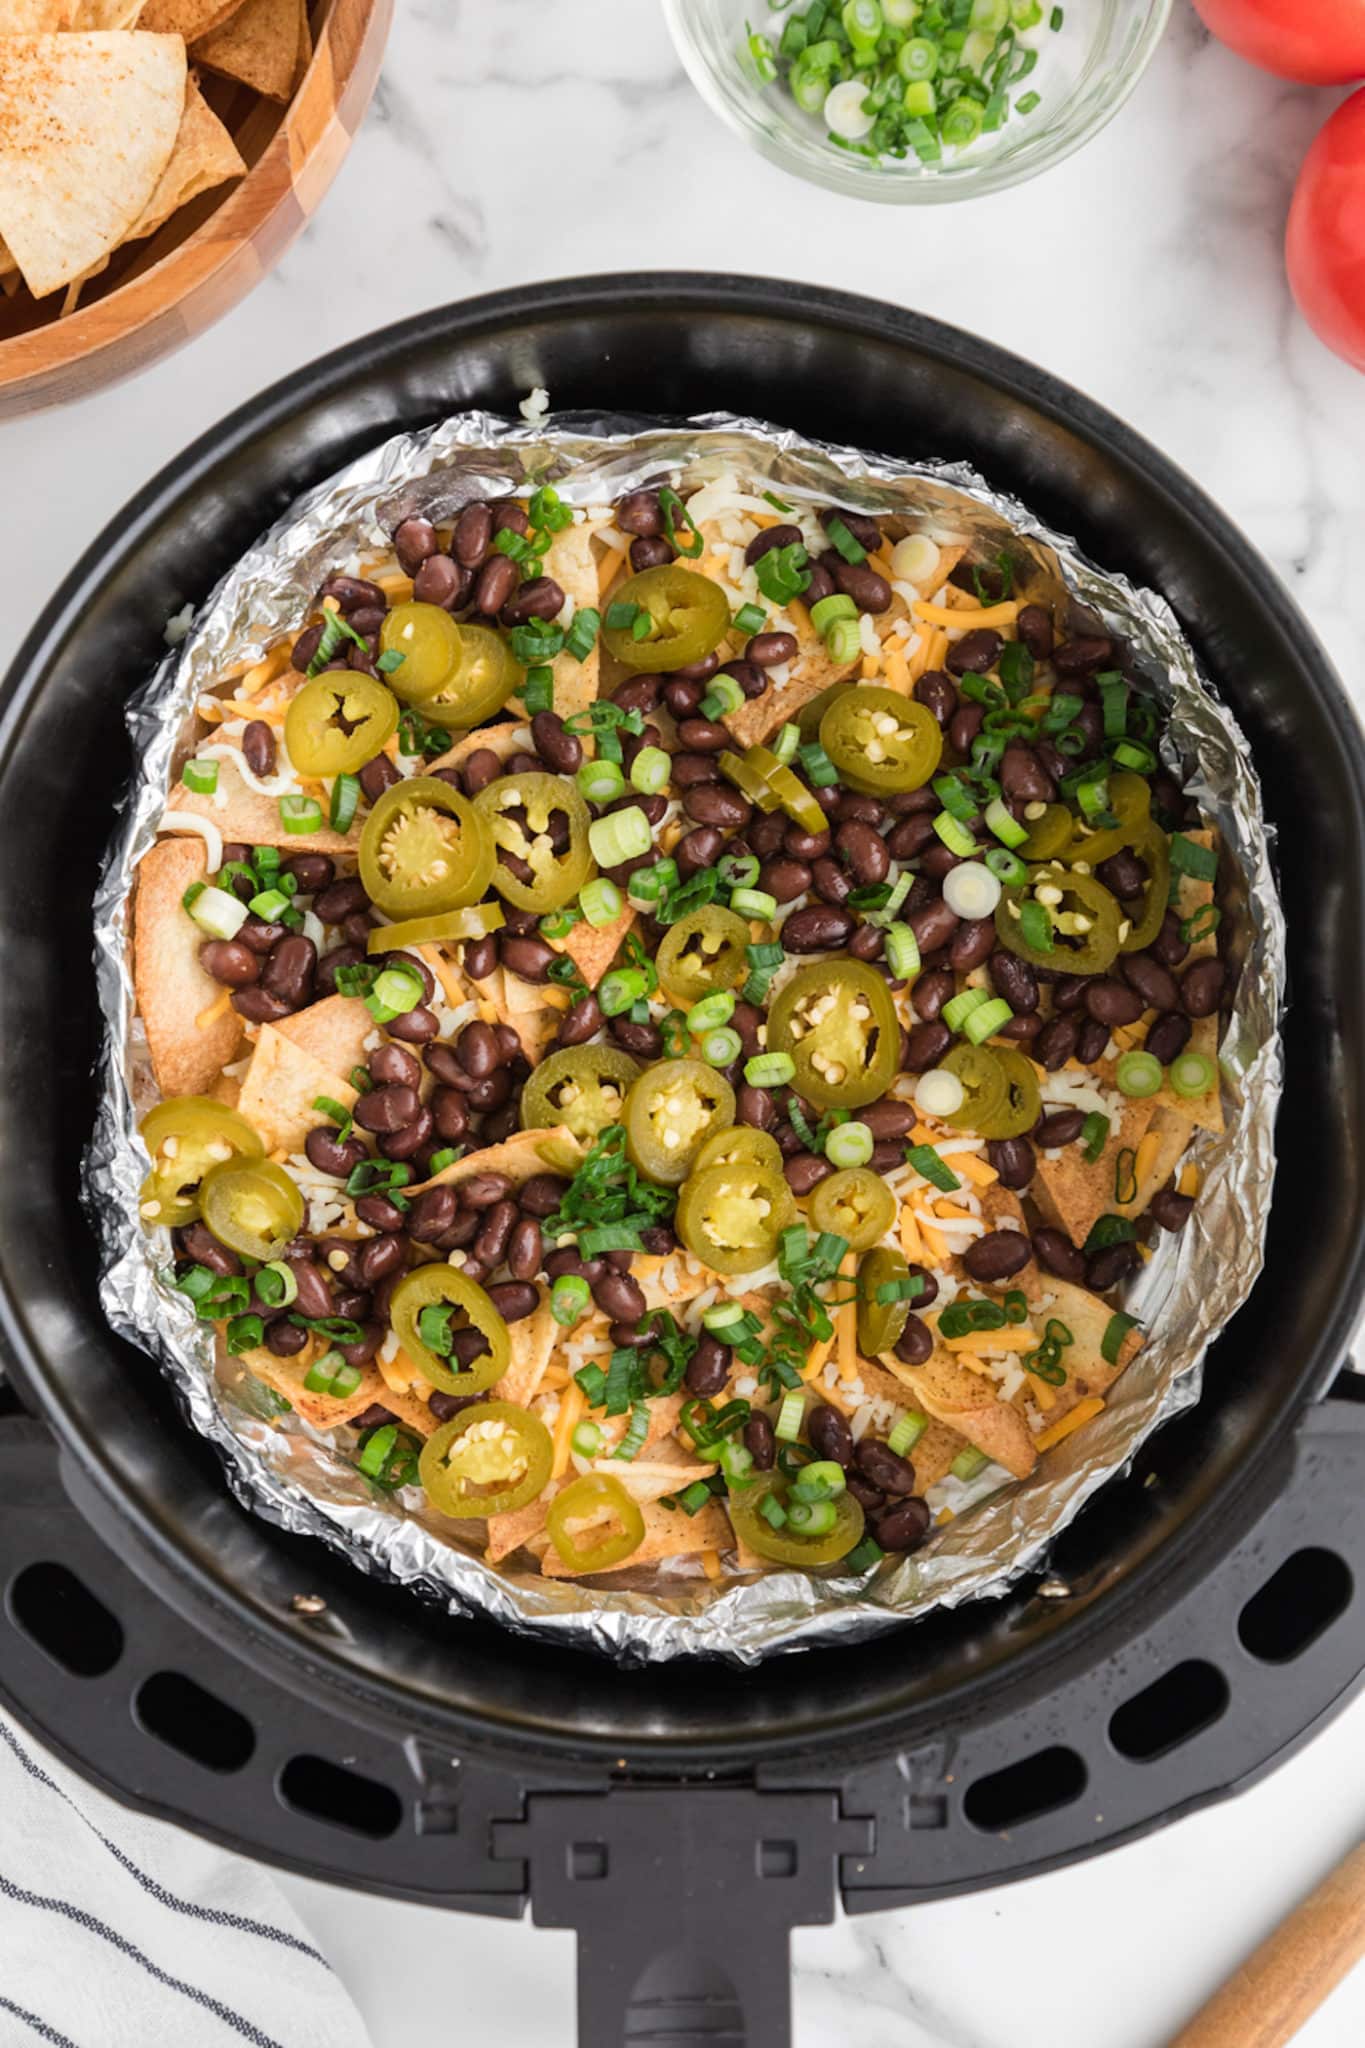 Nacho toppings of black beans and jalapenos on top of chips in an air fryer basket.